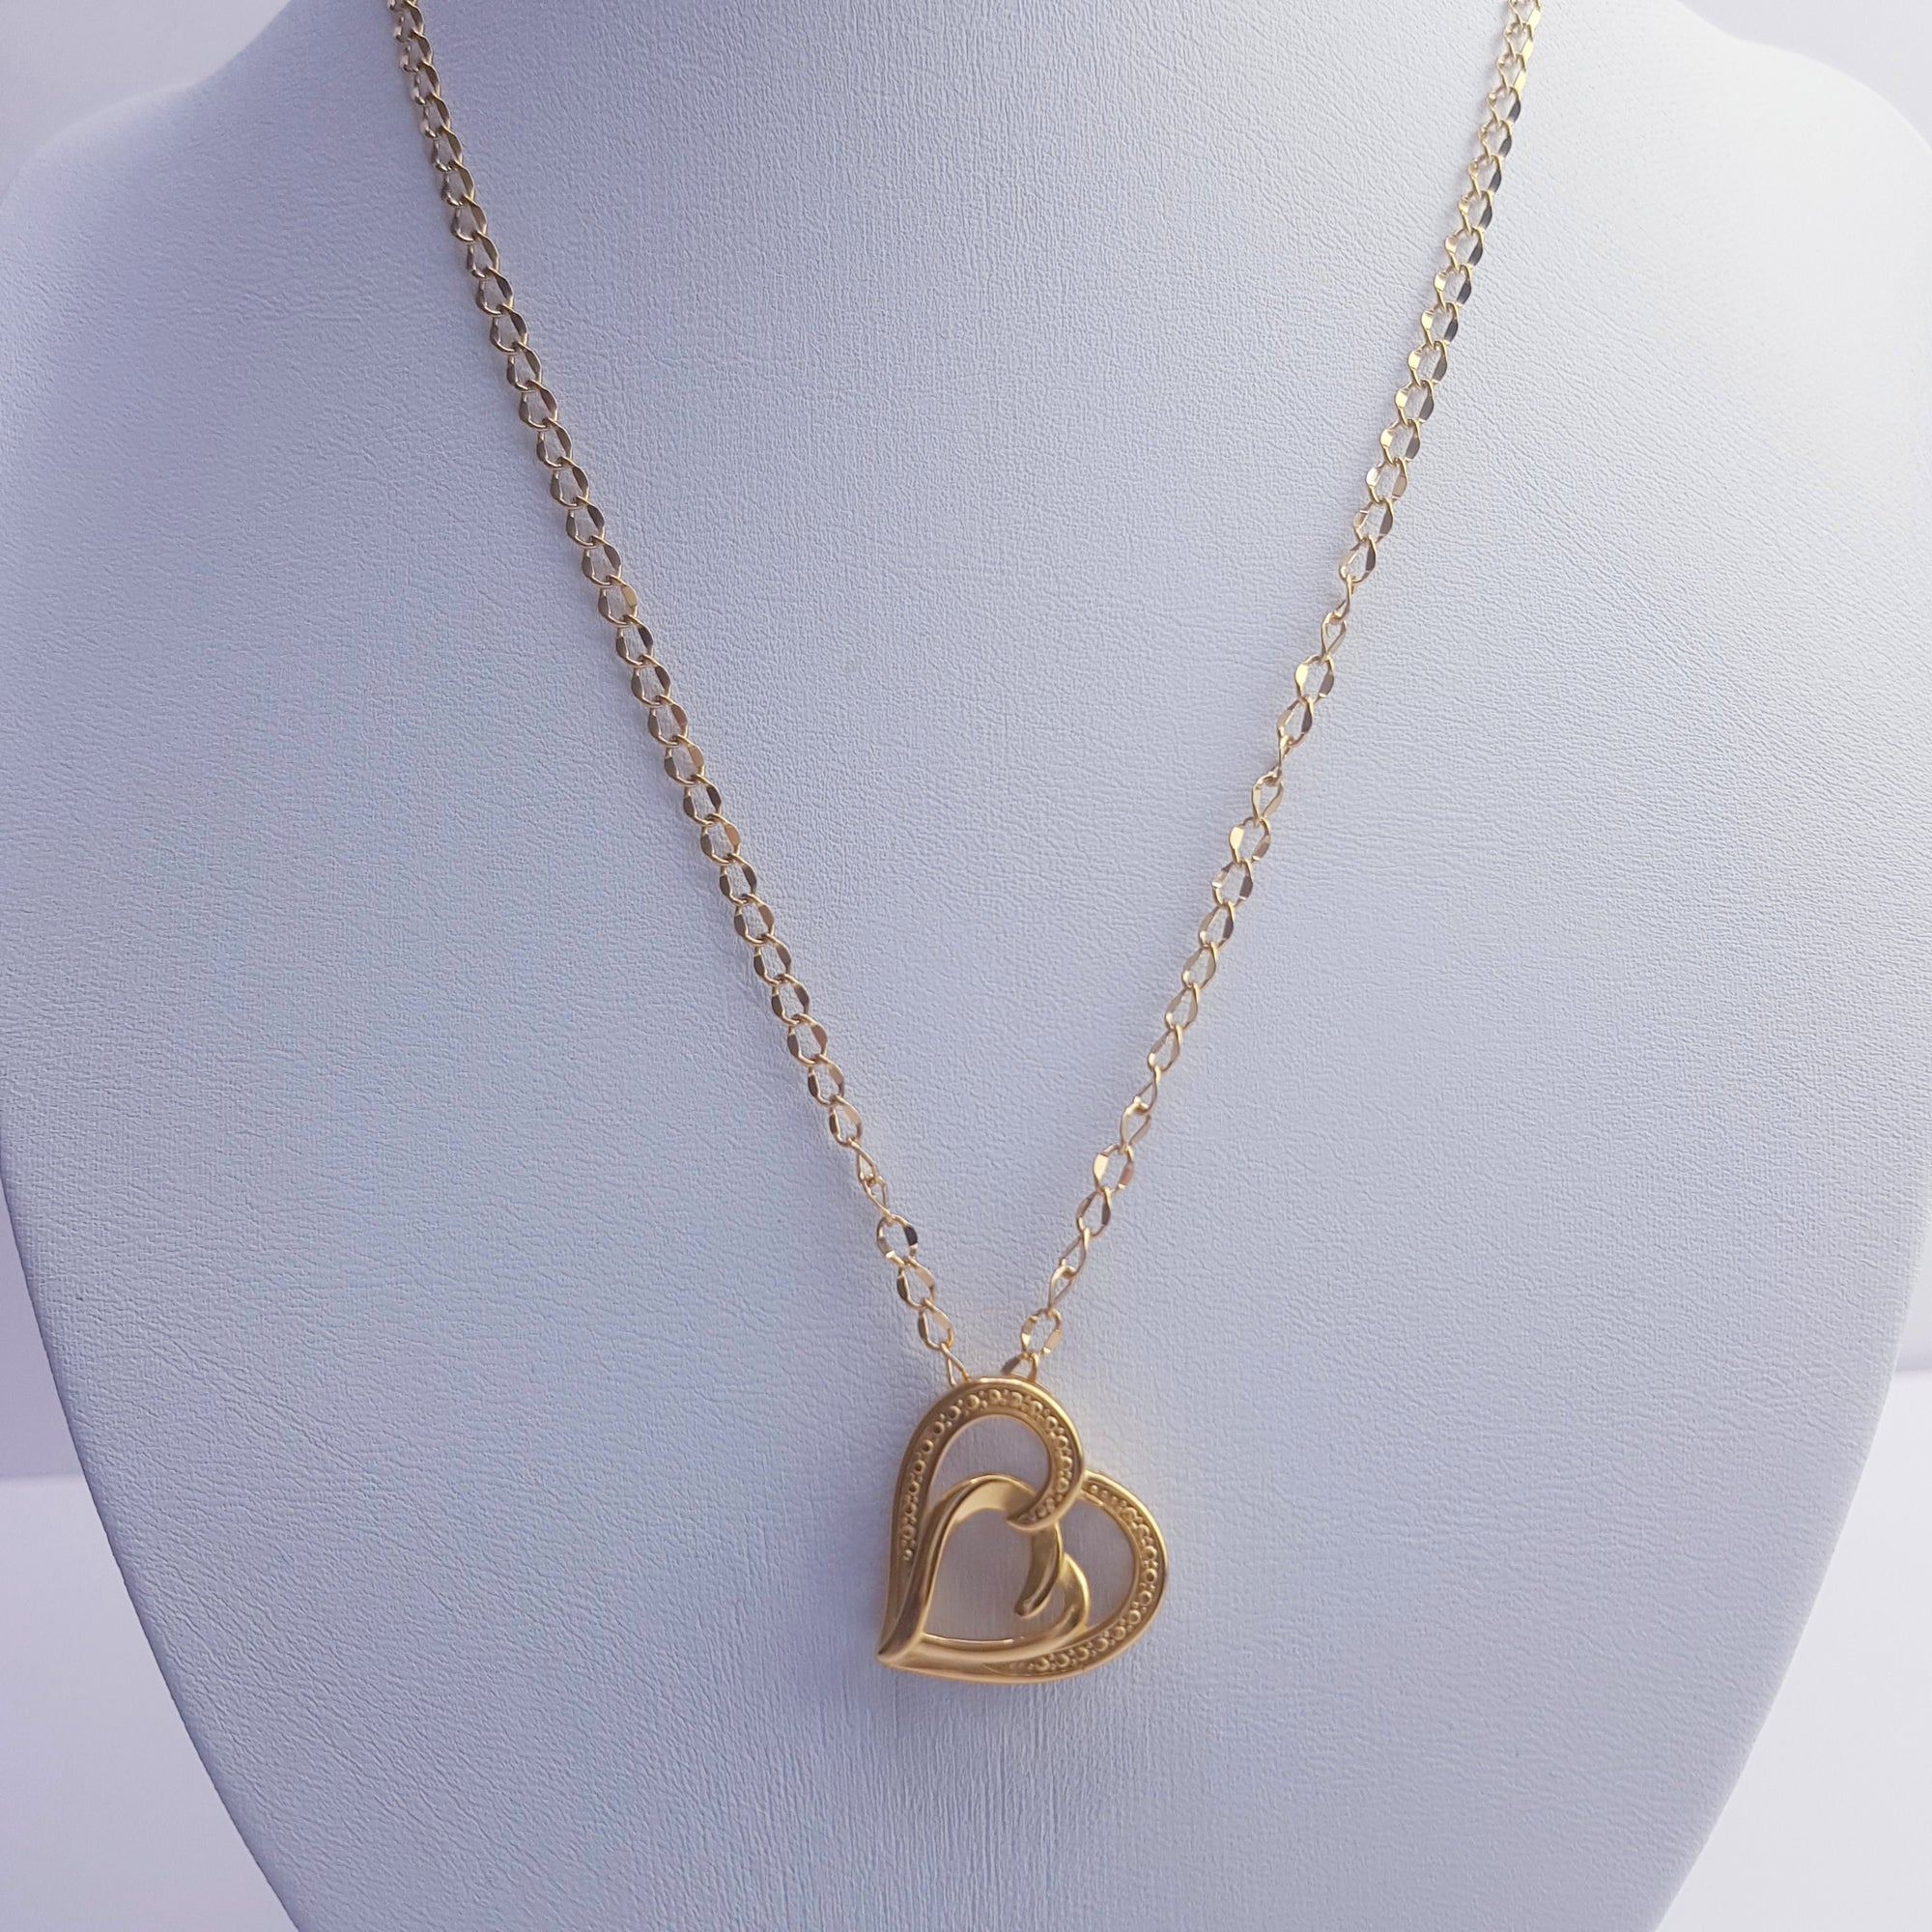 Heart Sync Necklace